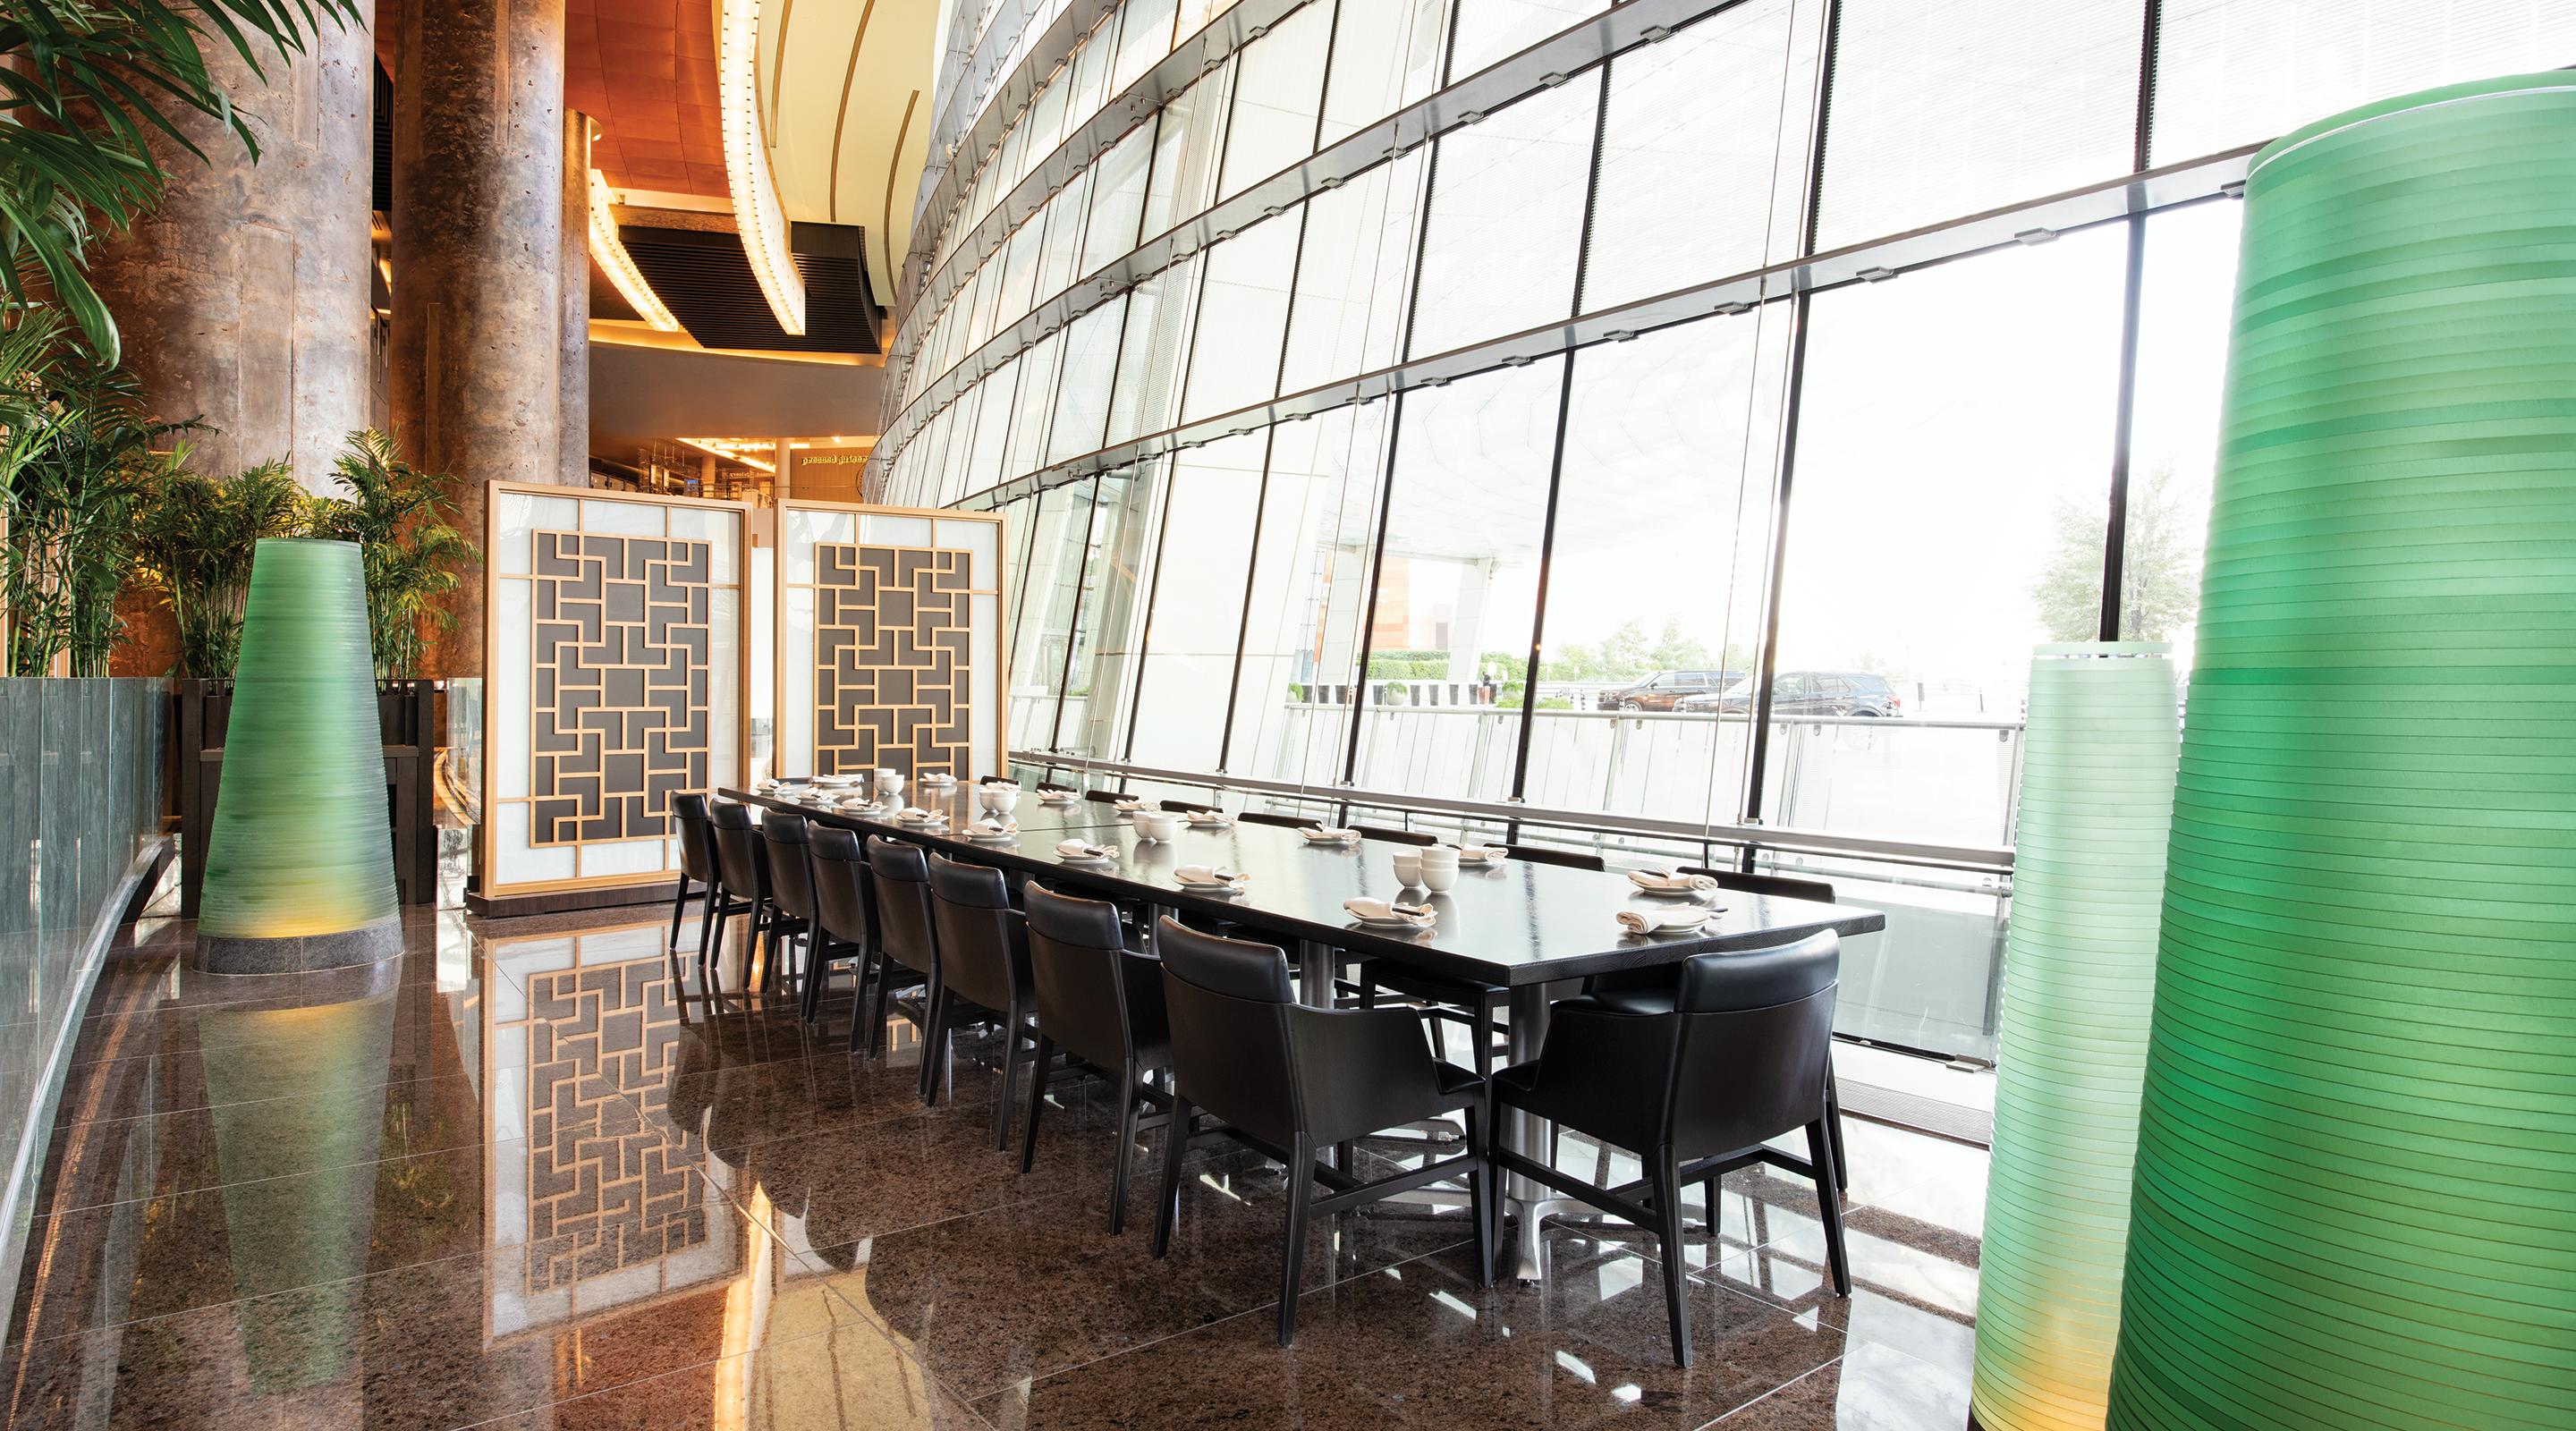 A private dining room with a long table next to floor to ceiling windows.